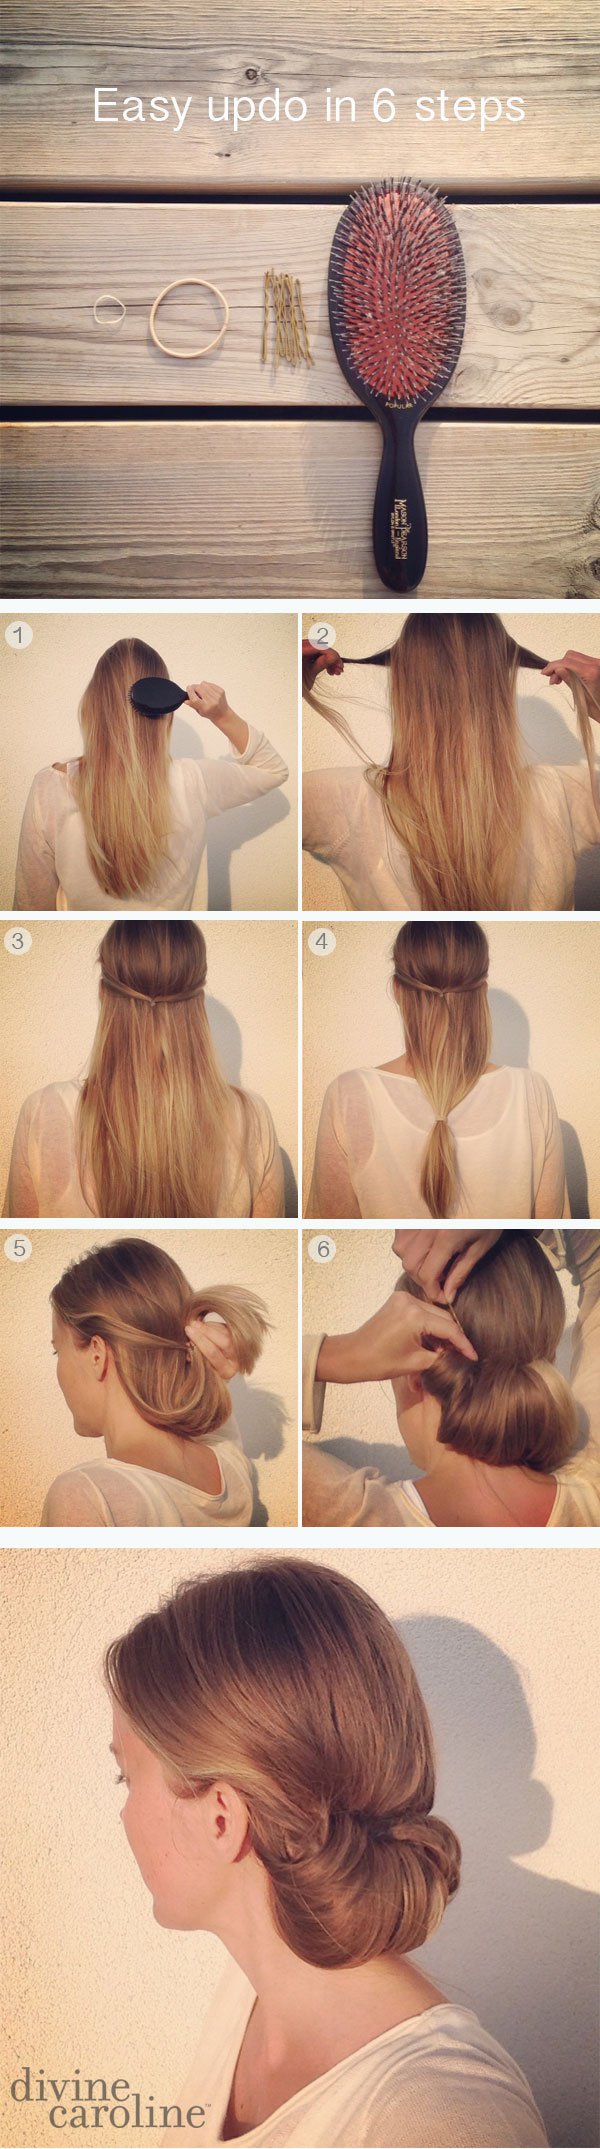 Tucked Updo Hairstyle Tutorial